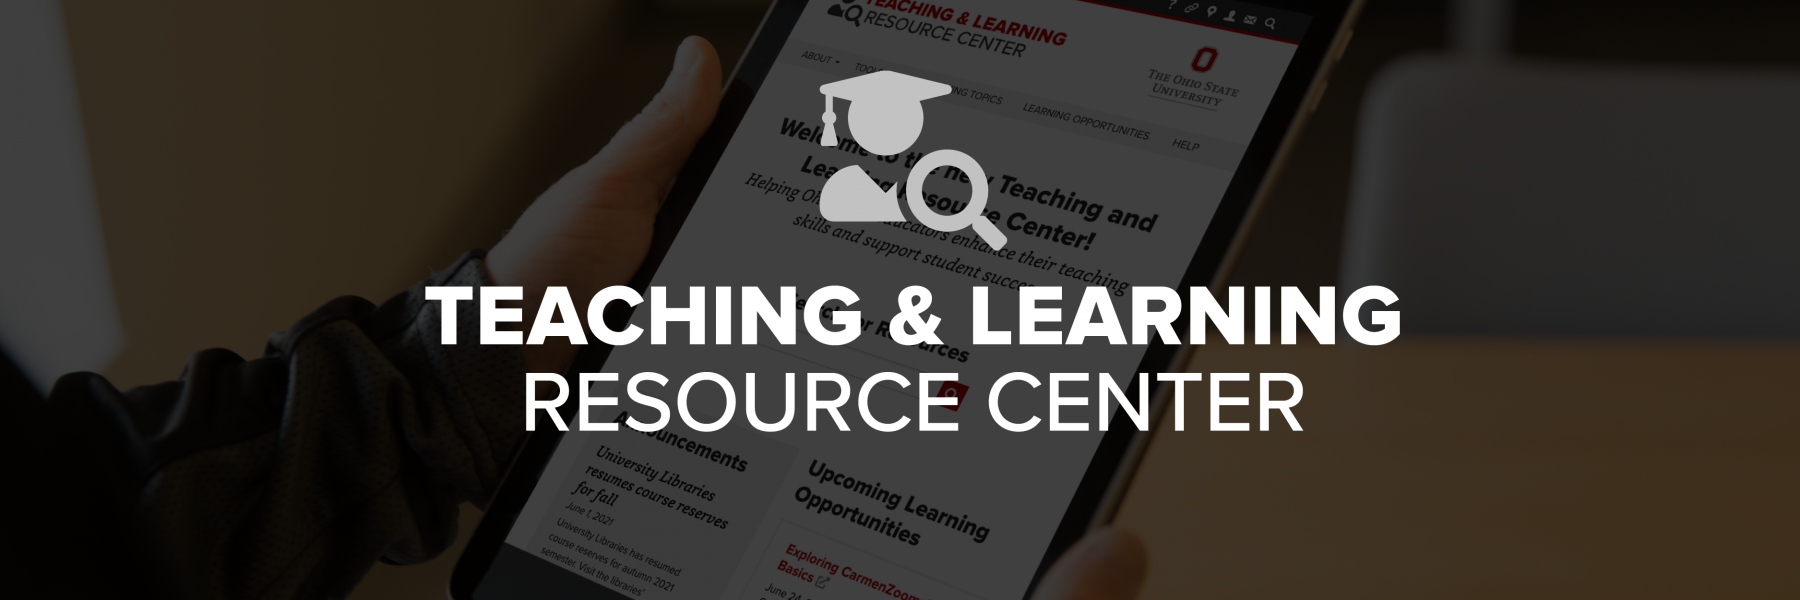 Teaching and Learning Resource Center